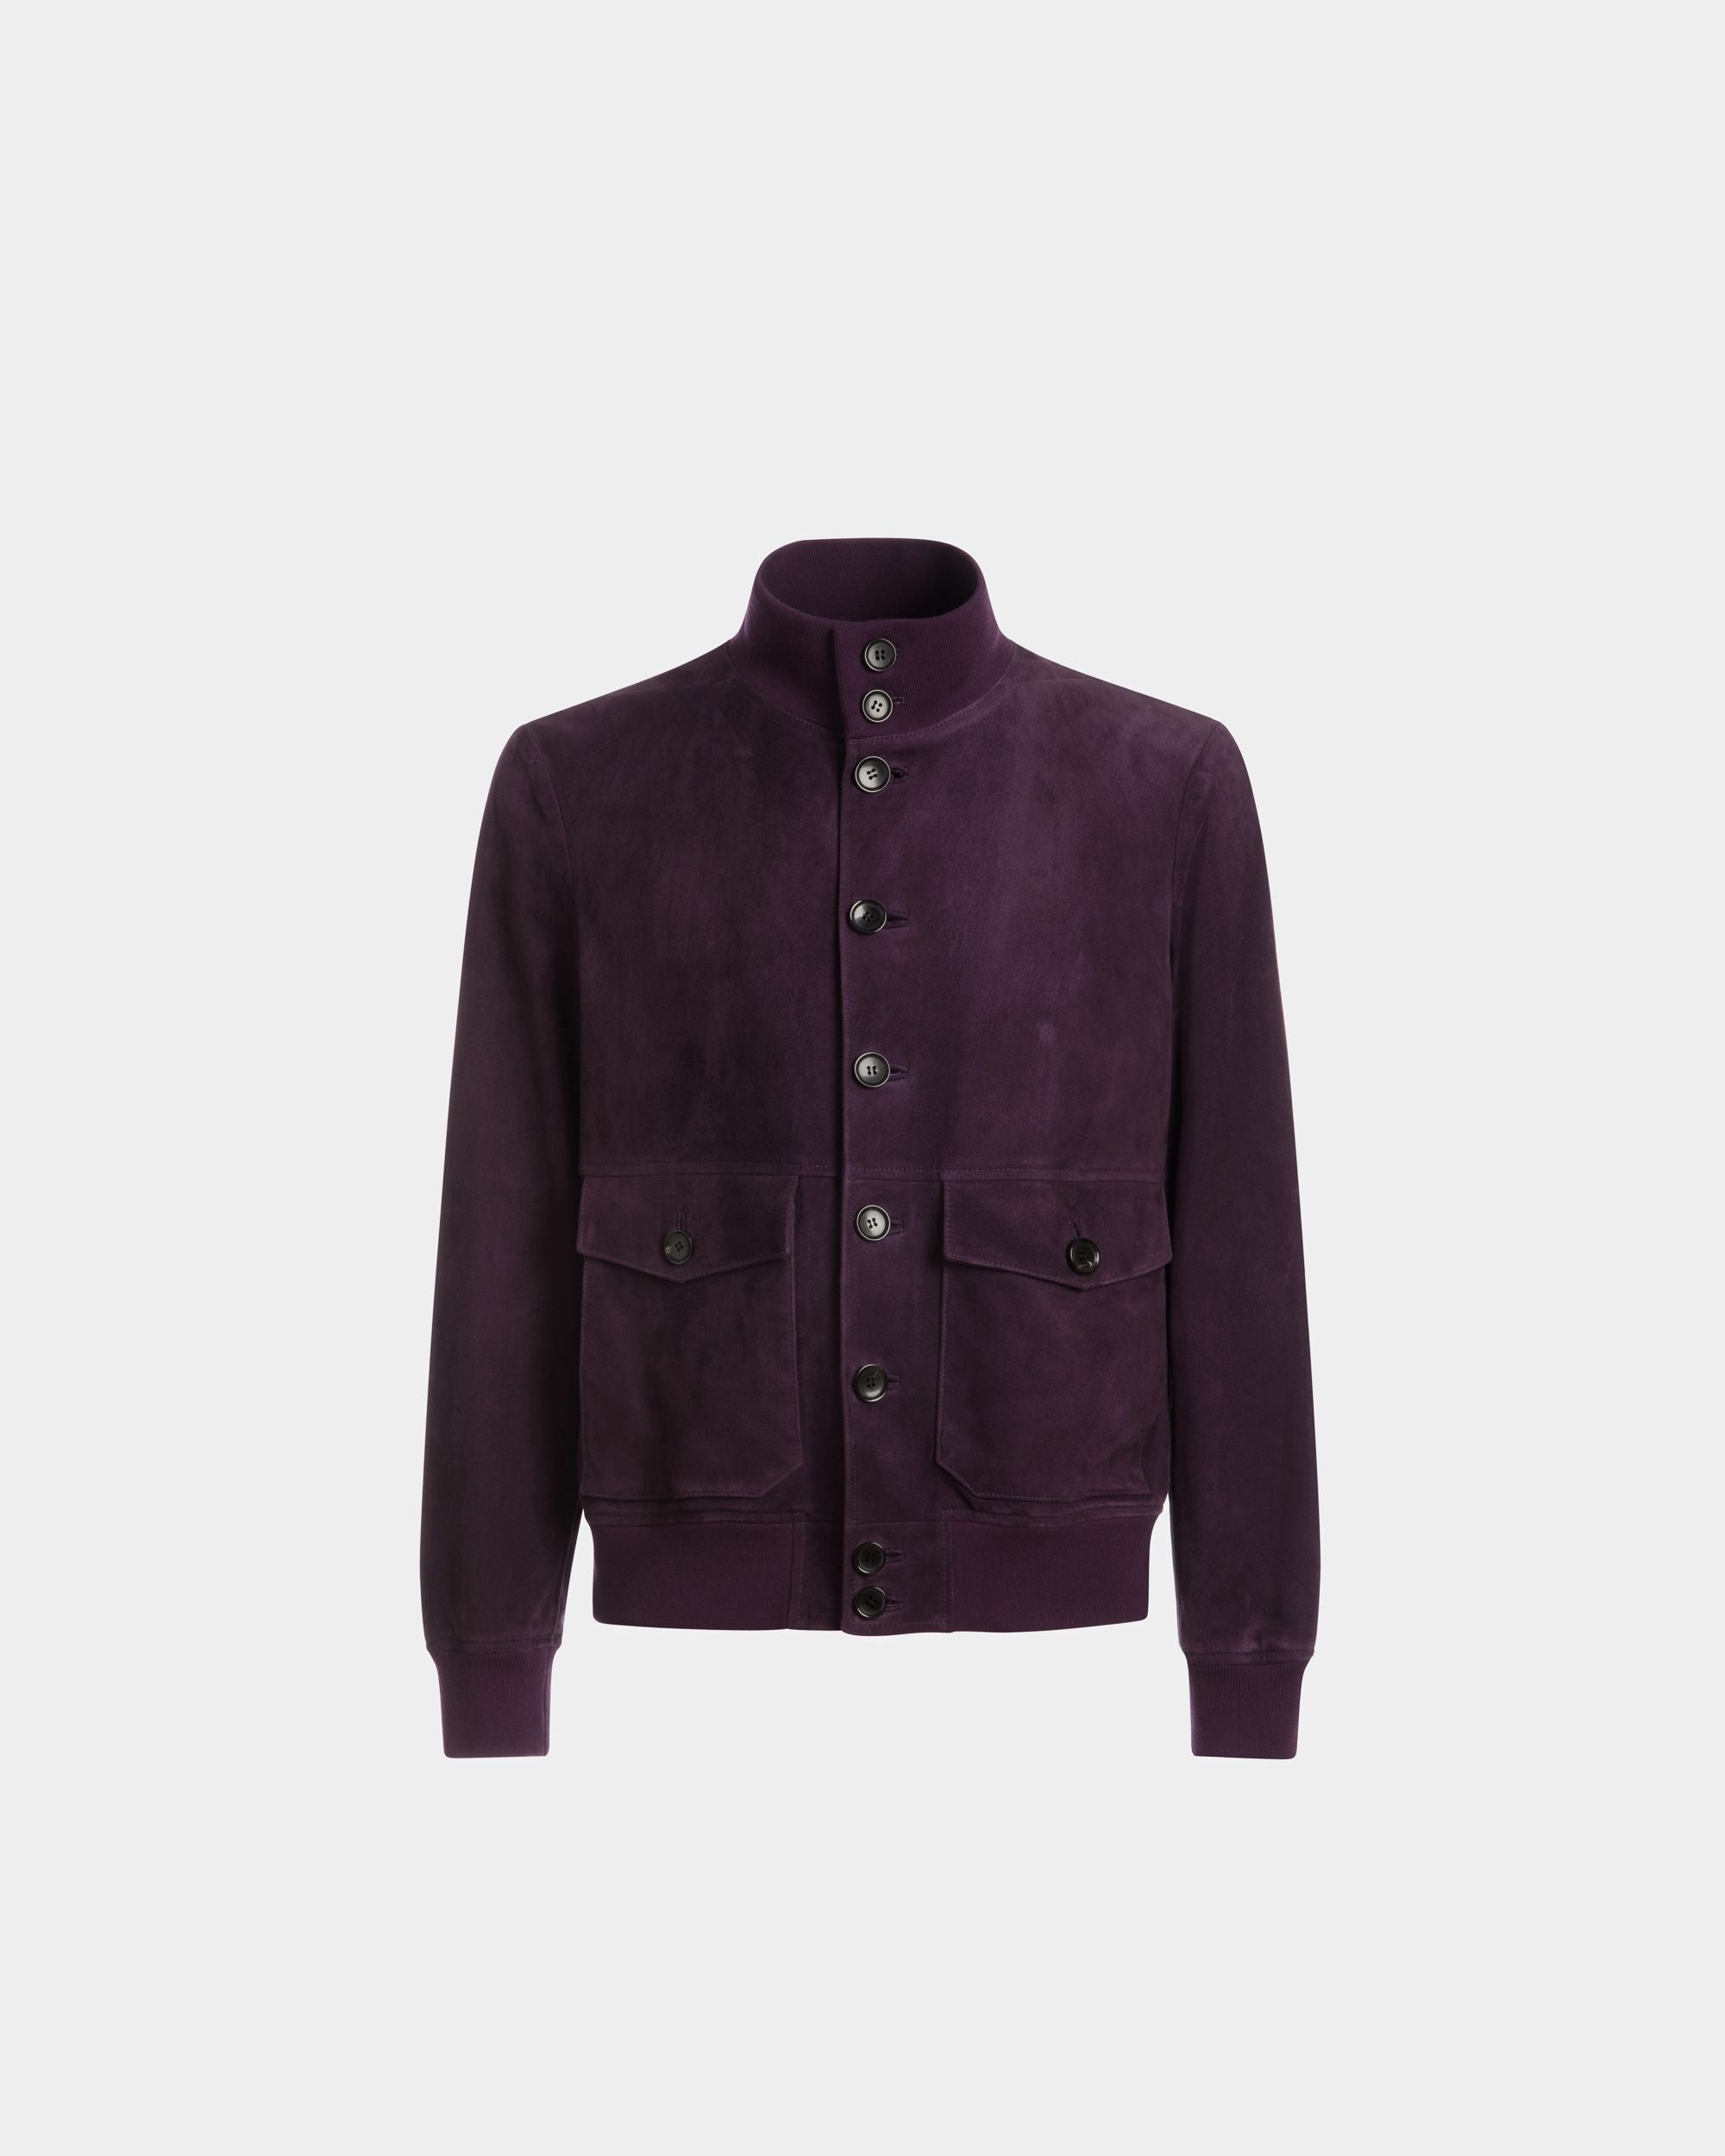 High Neck Bomber Jacket | Men's Outerwear | Orchid Suede | Bally | Still Life Front